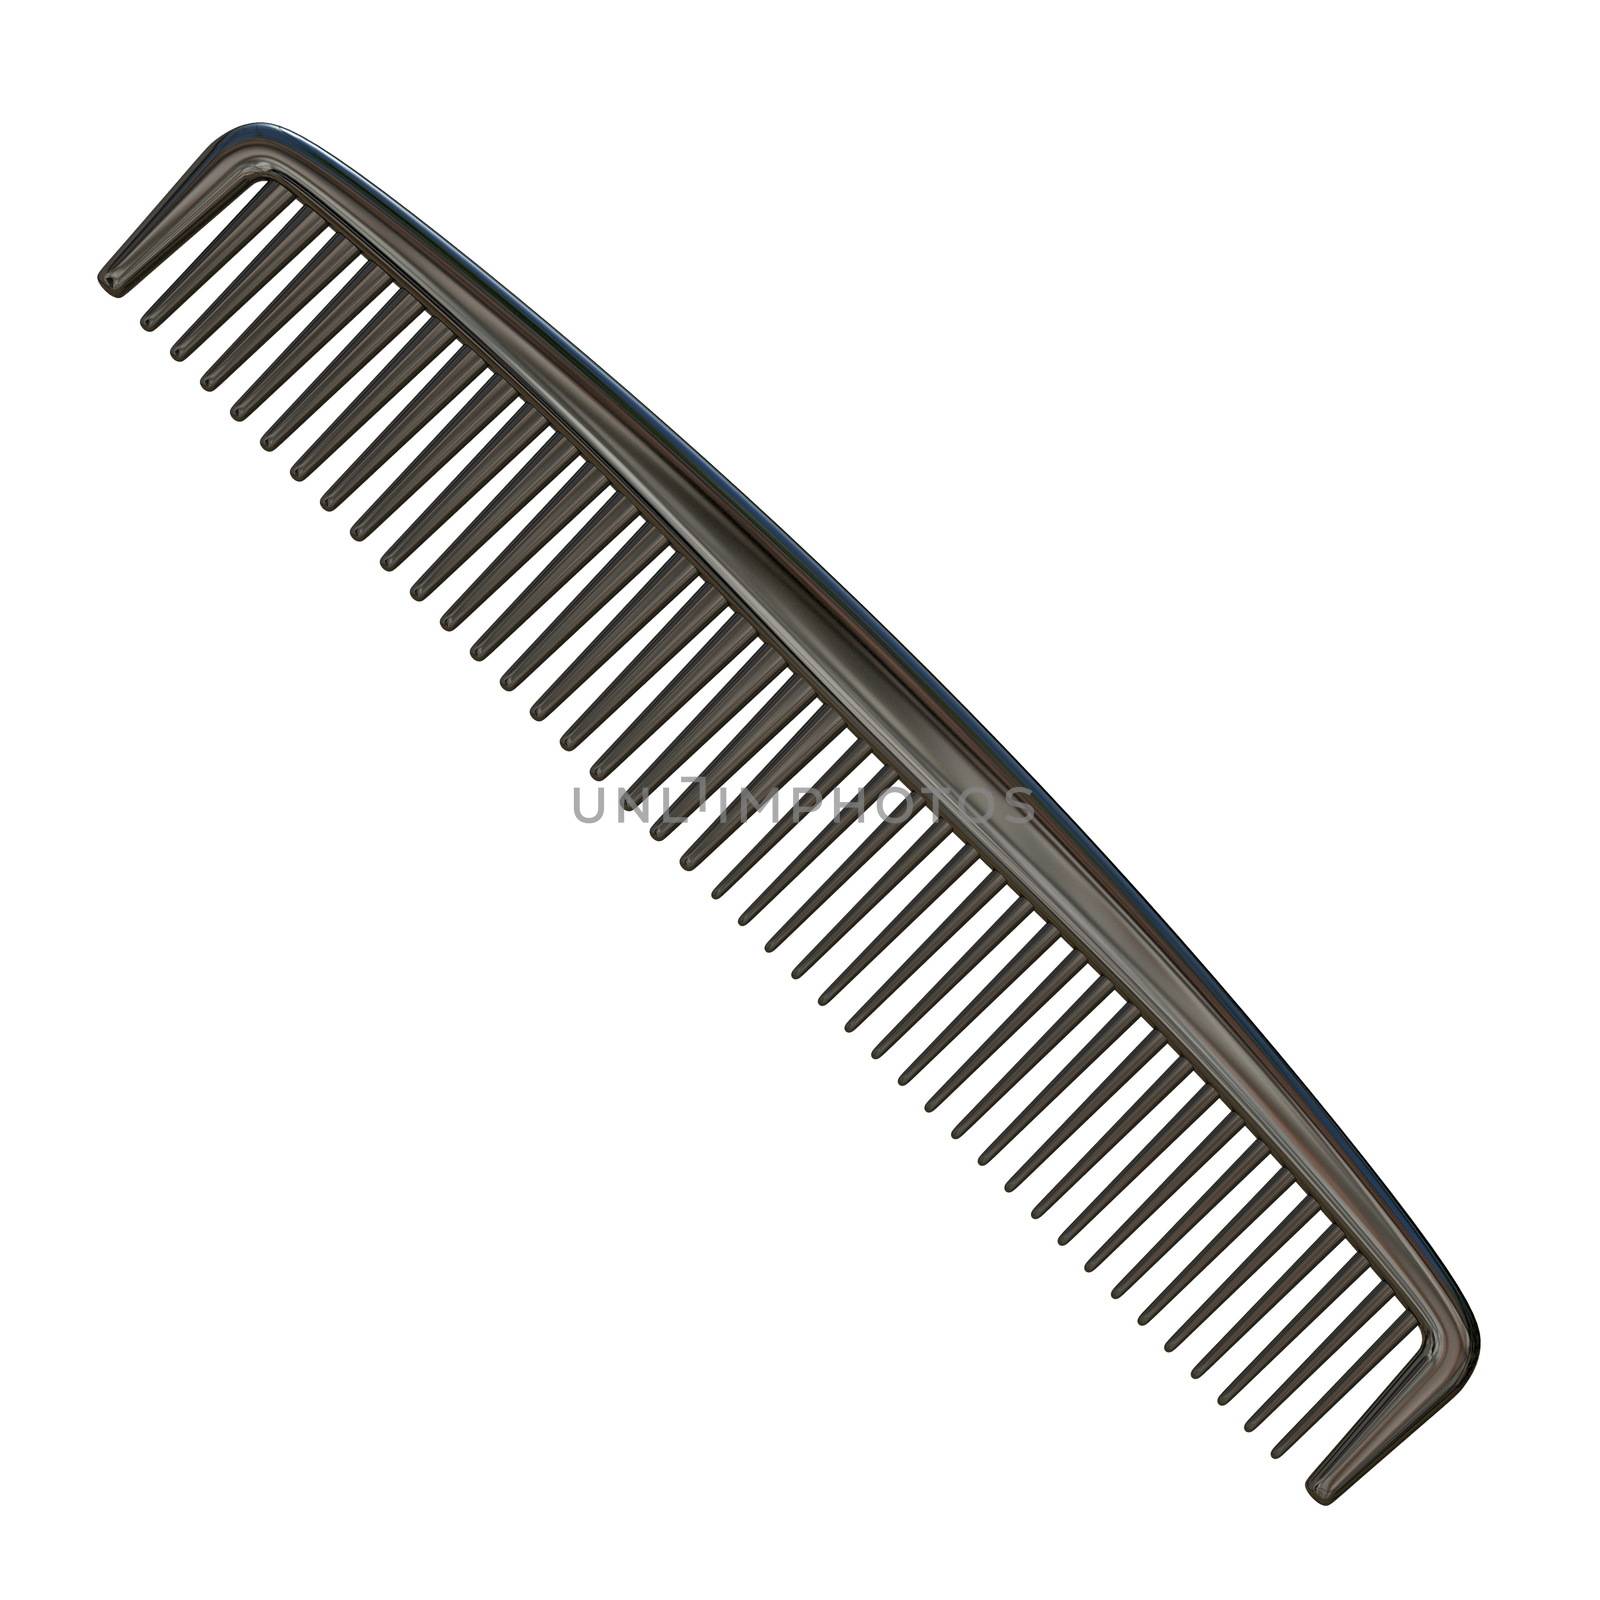 Plastic comb 3D render illustration isolated on white background